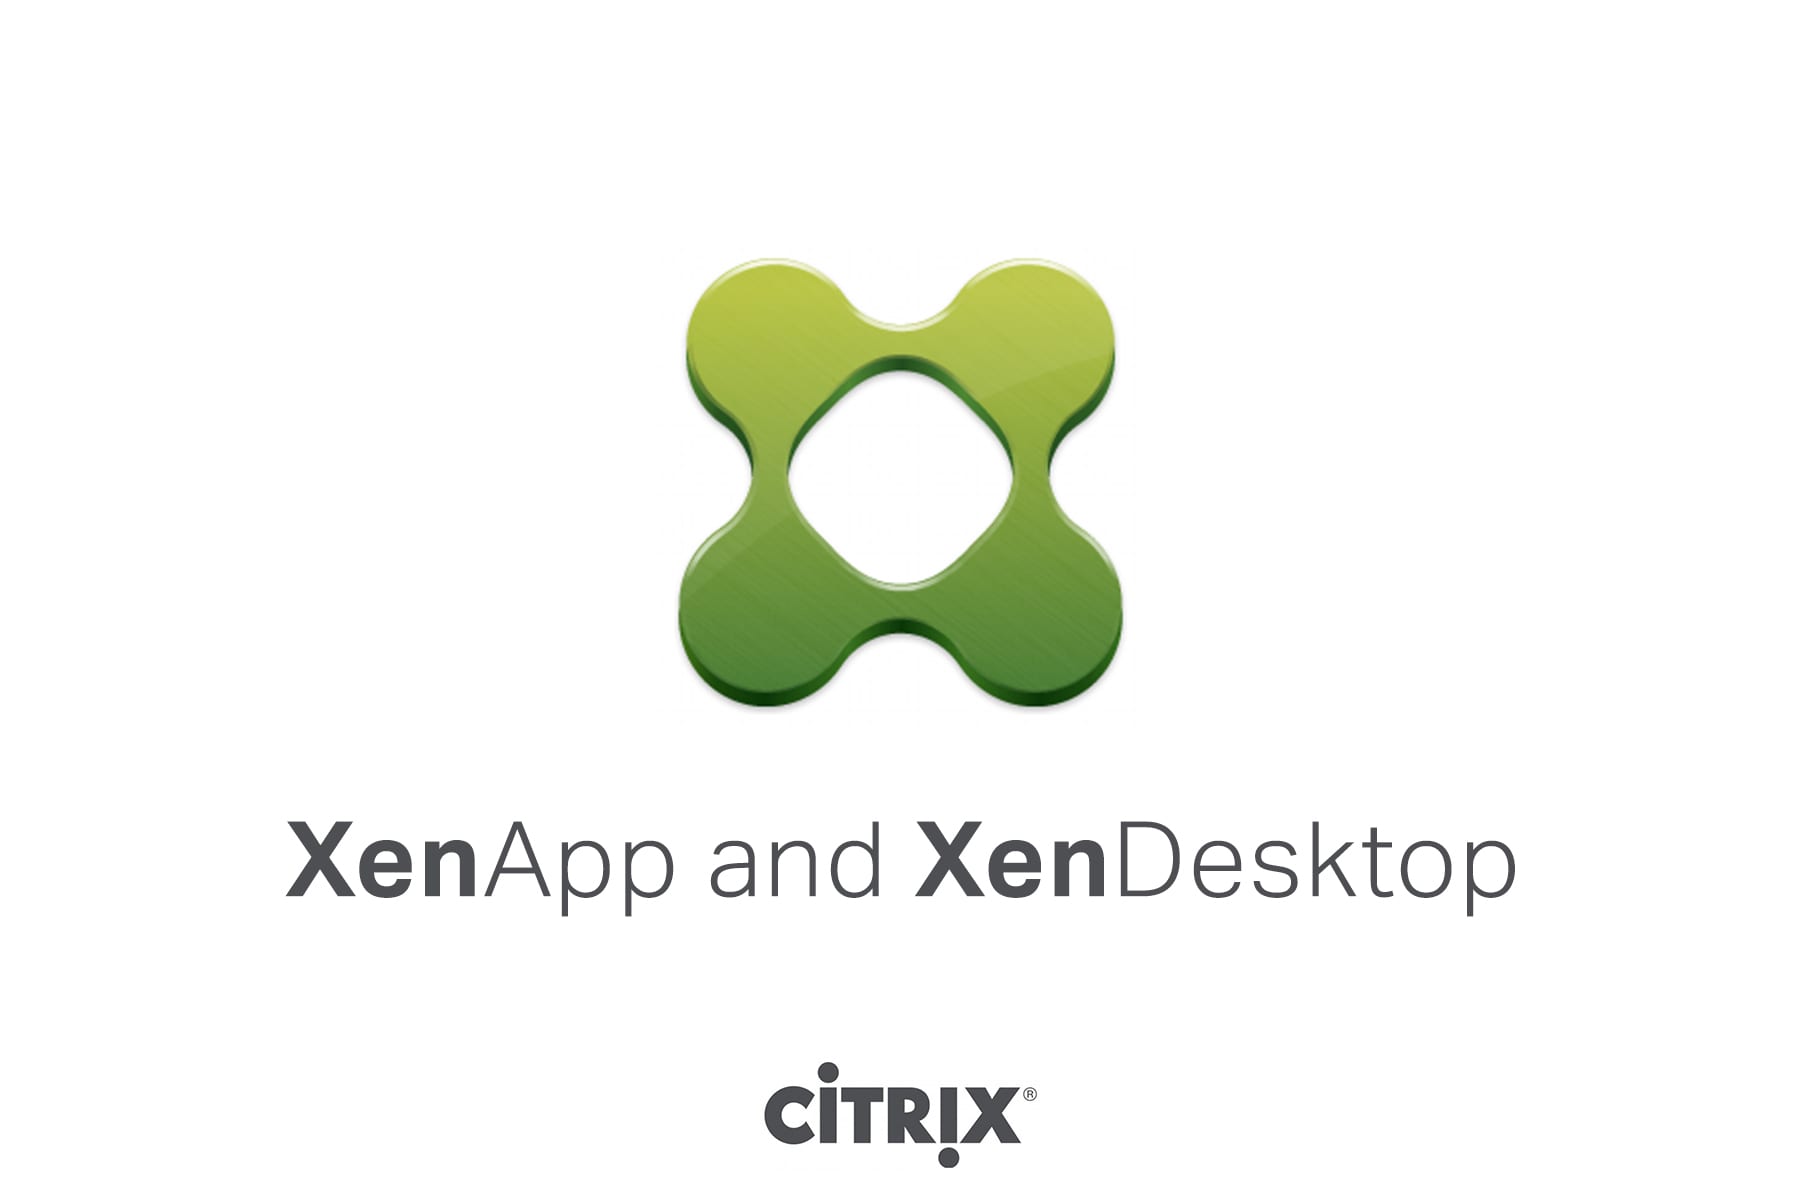 What Are the Main Differences Between Citrix XenApp and XenDesktop?